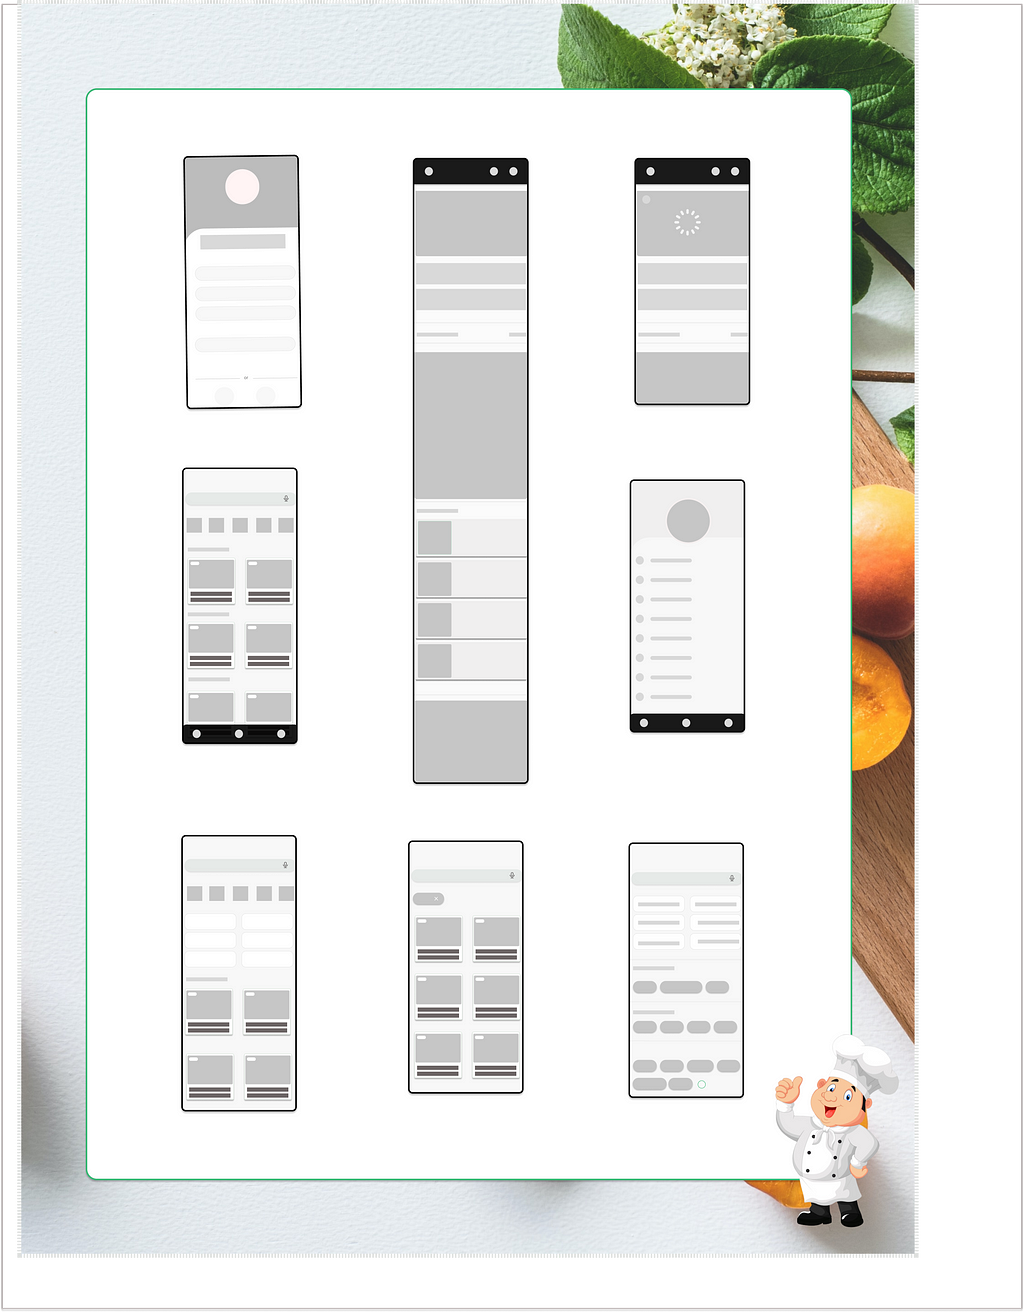 This image is of the Lo-fi wireframes of the redesigned app.